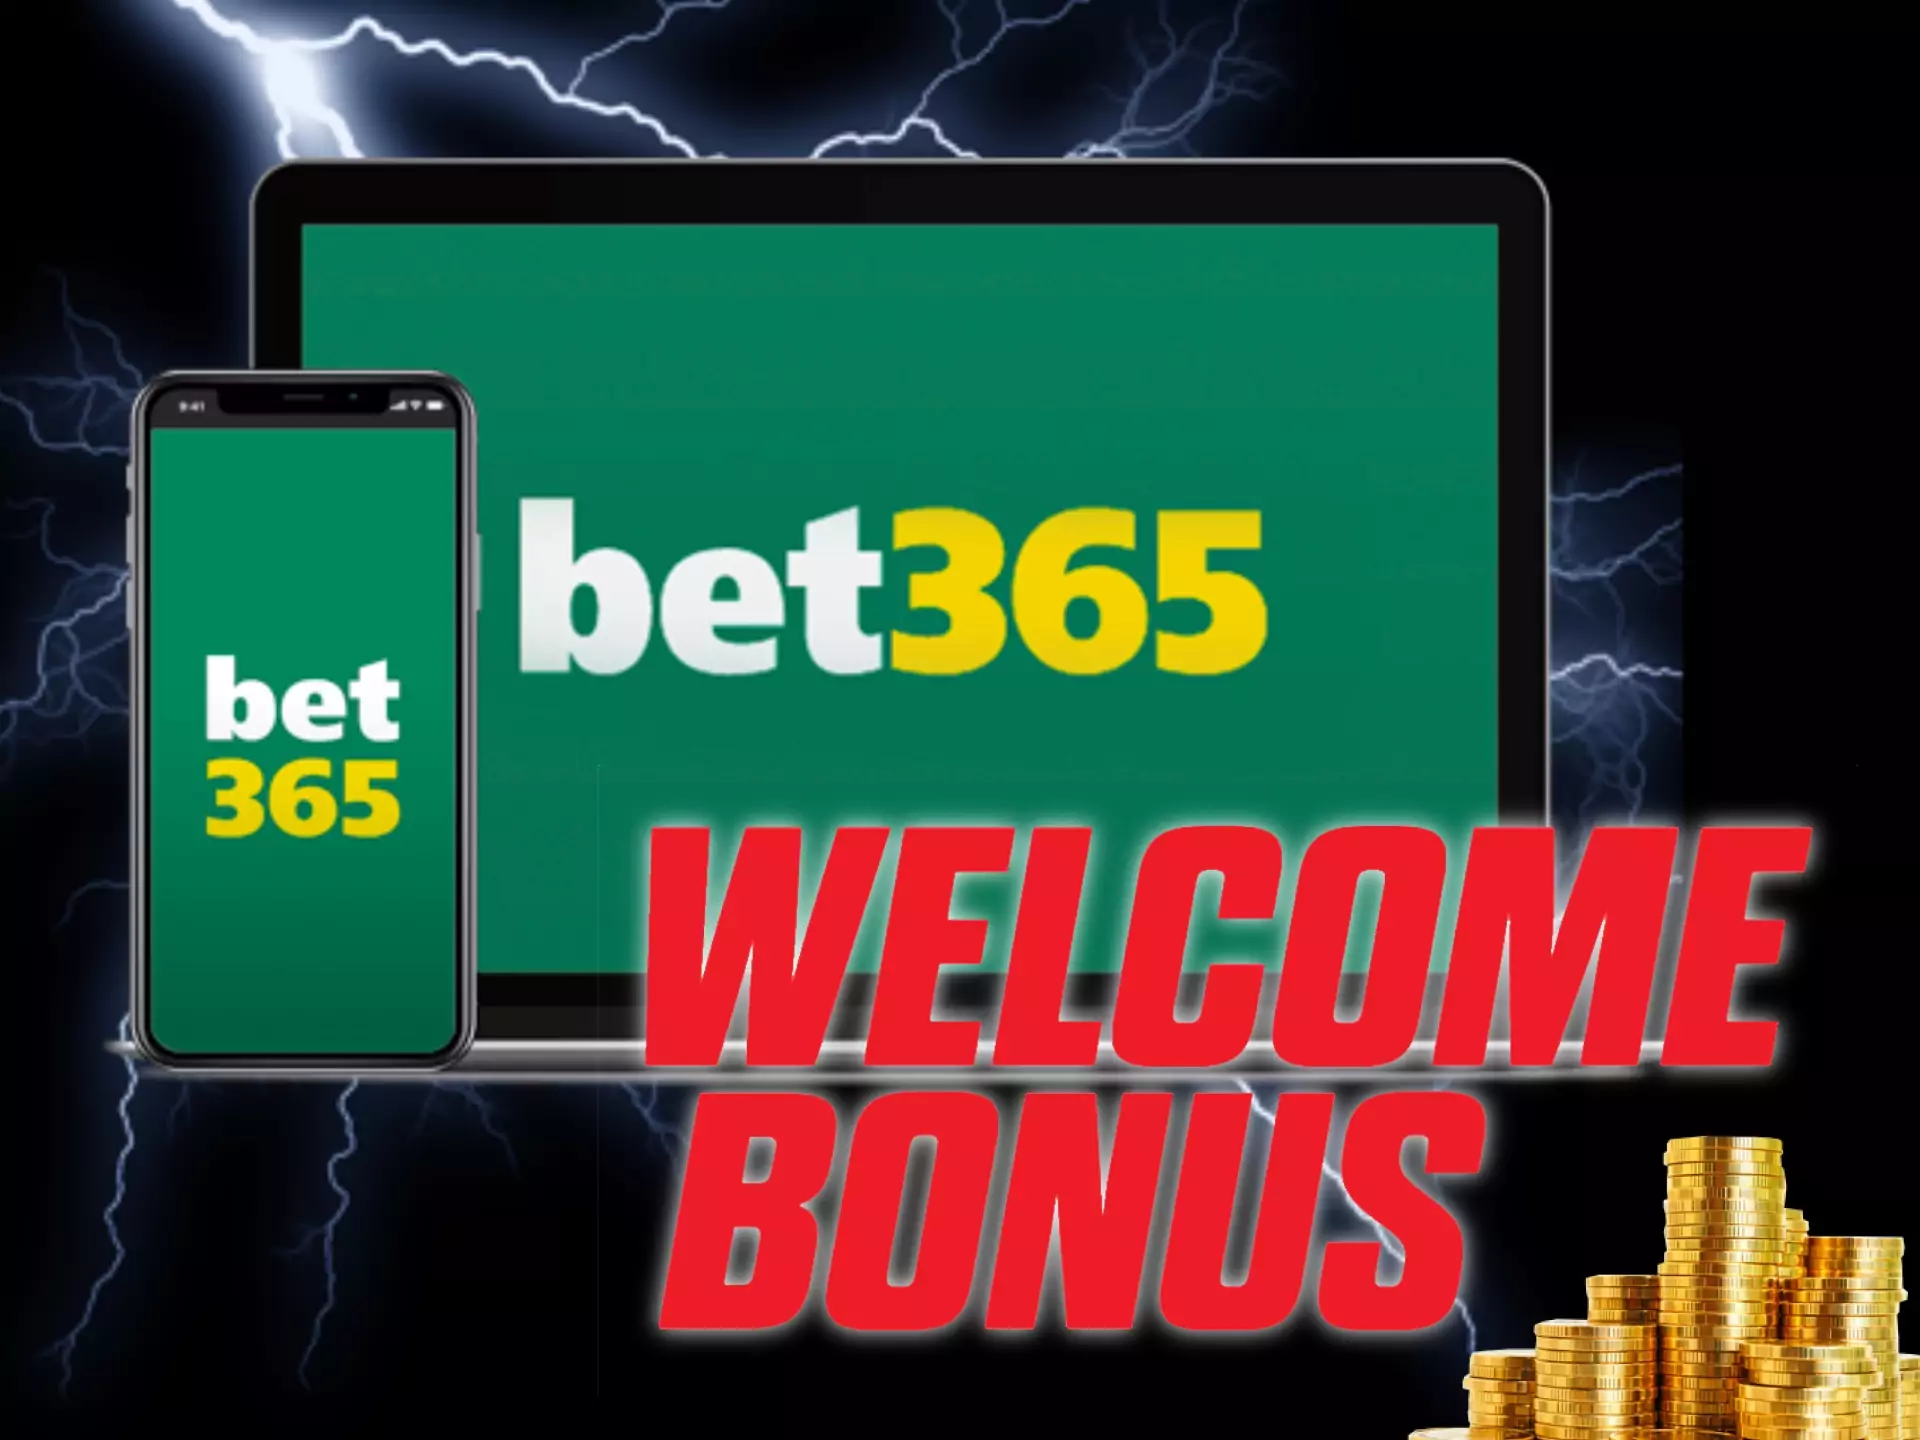 Make your first deposit at bet365 and get your welcome bonus on betting.